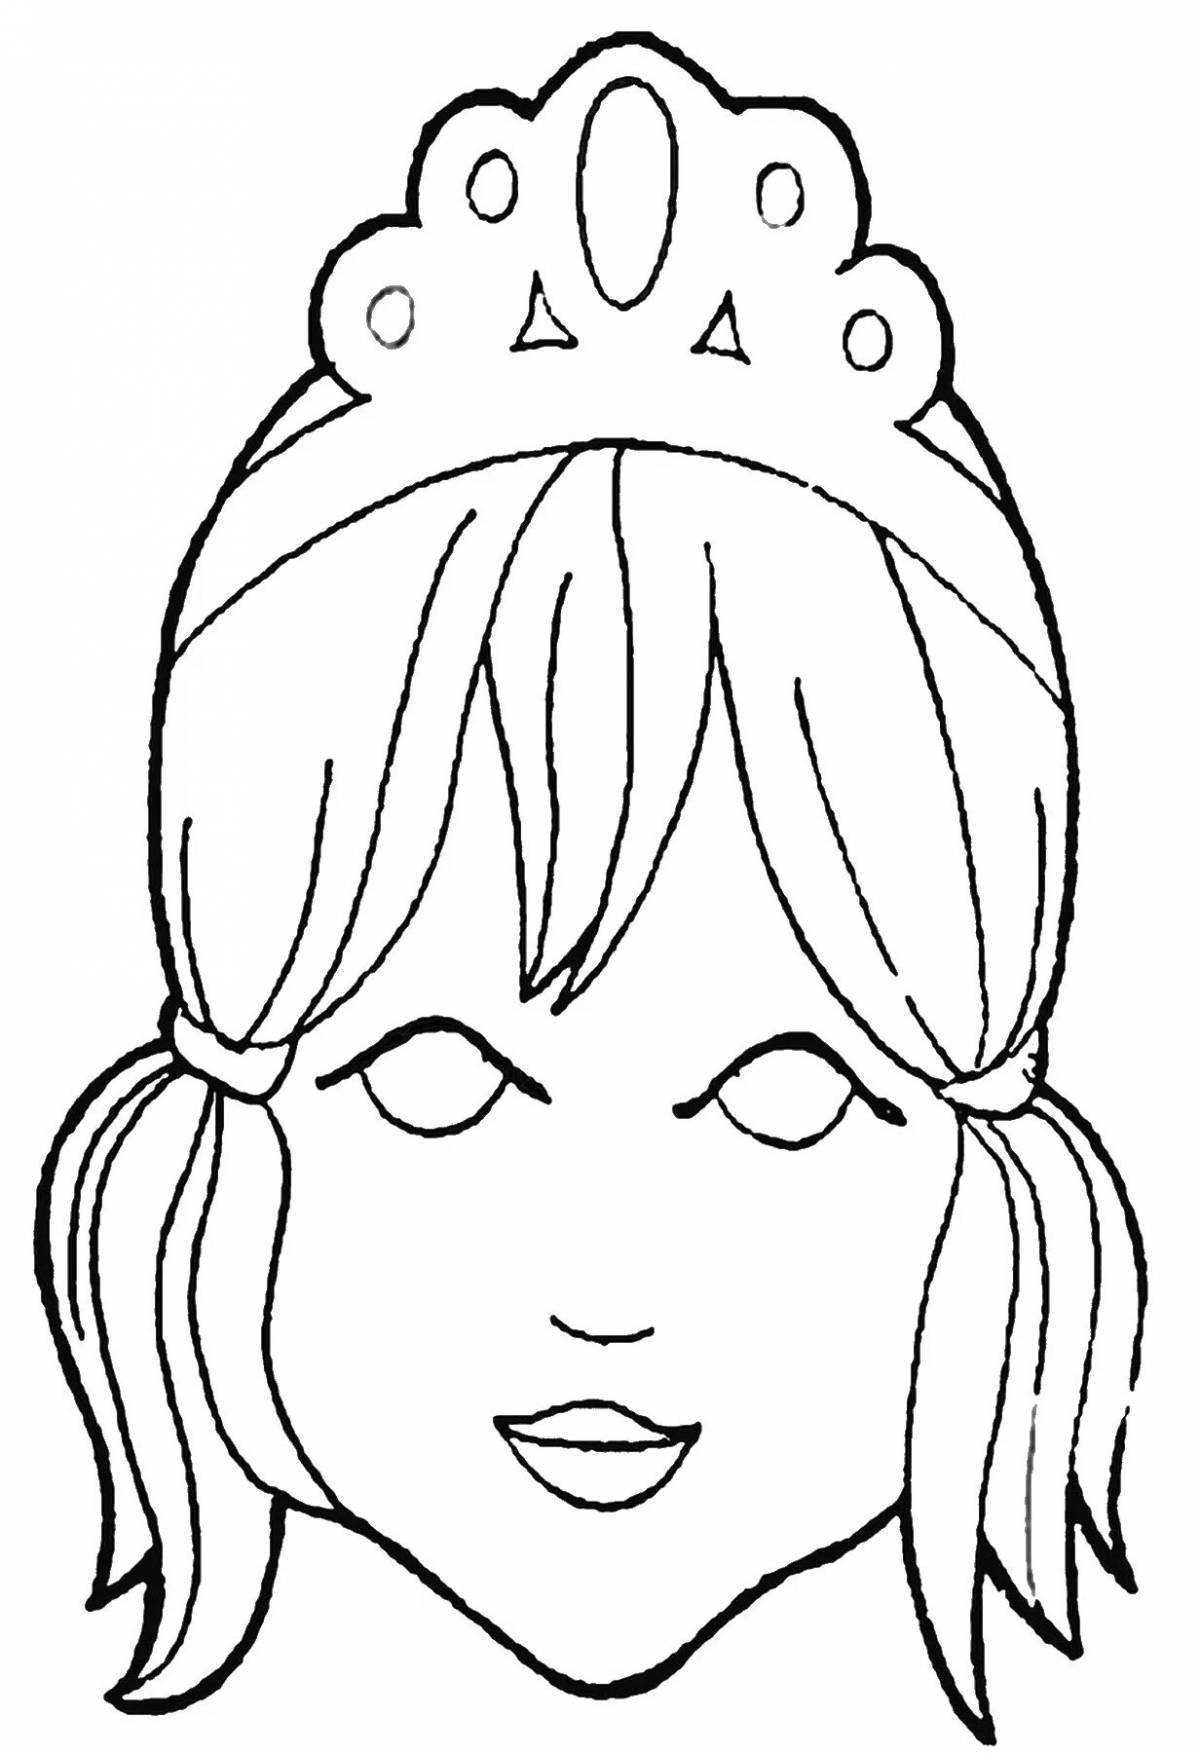 Coloring book of a shining woman's face for children